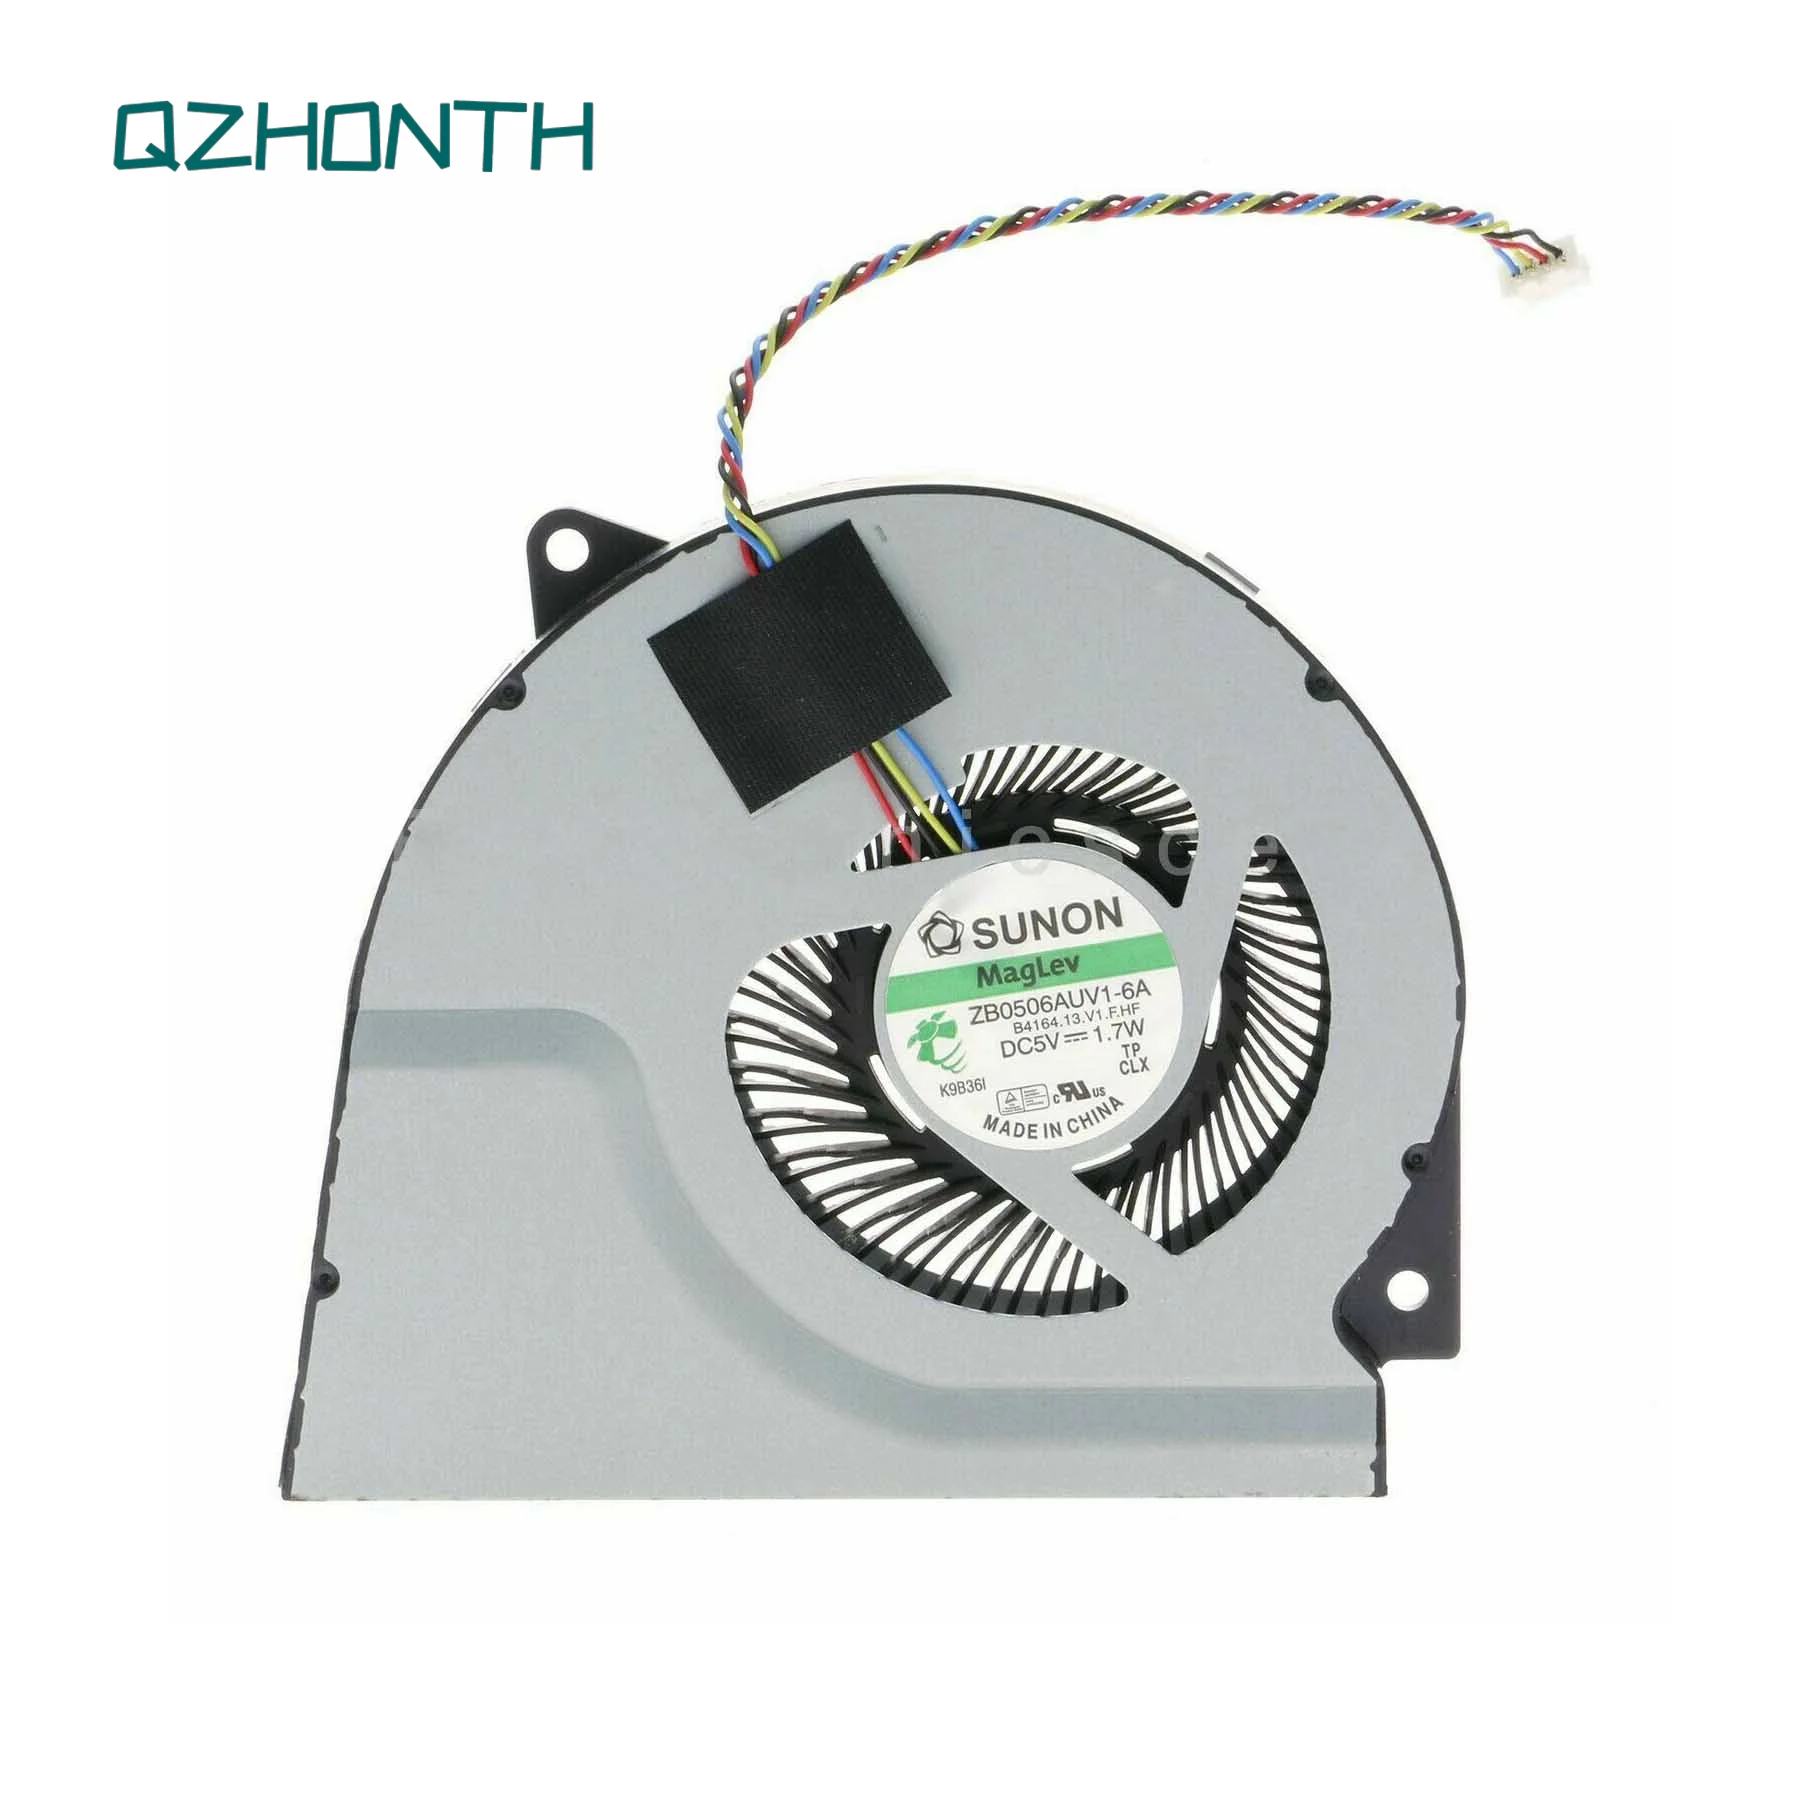 

New For Dell Inspiron AIO 2350 7459 CPU Cooling Fan Compatible Delta BSB0705HC CJ2B NG7F4